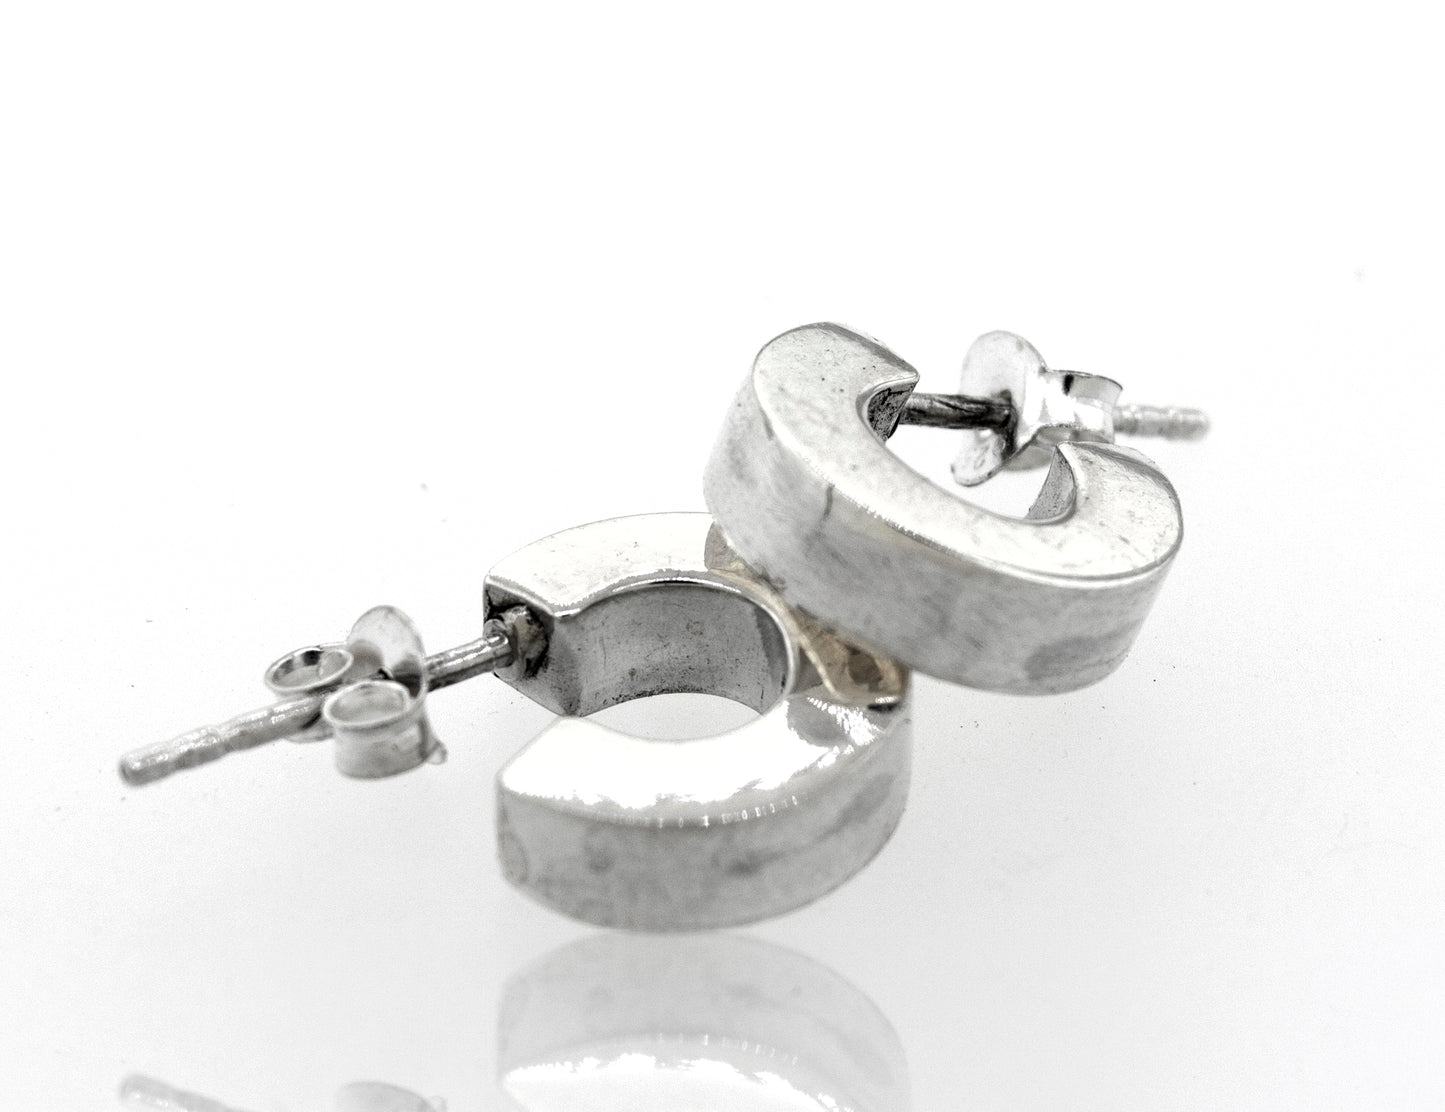 A pair of Super Silver Sterling Silver Half Hoop Stud Earrings with a high polish on a white surface.